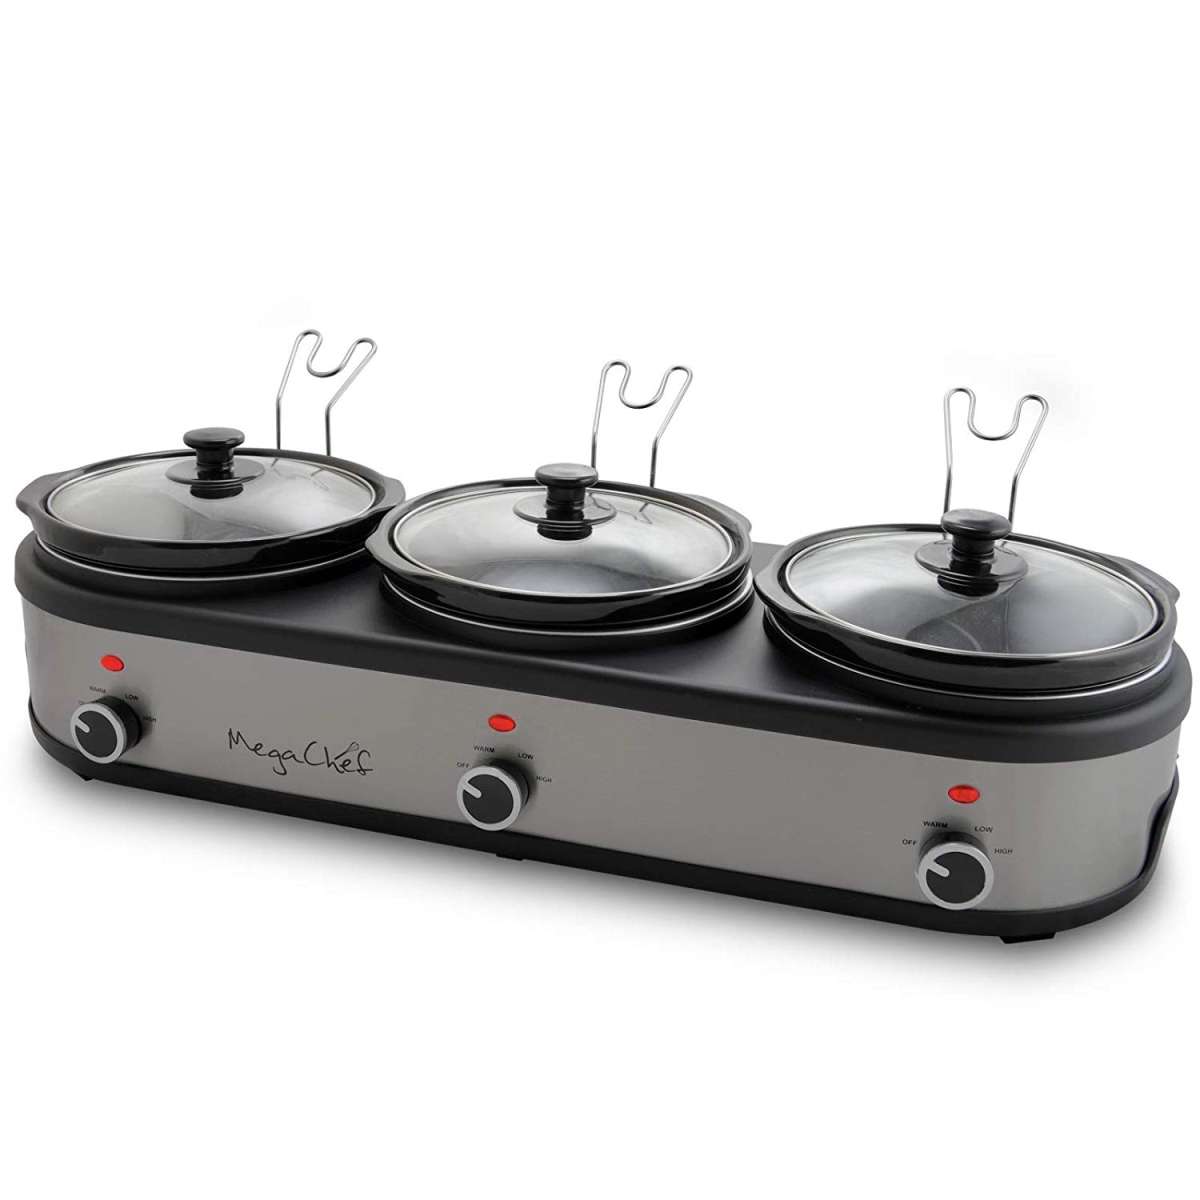 Mc-1203 Triple 2.5 Qt. Slow Cooker & Buffet Server In Brushed With 3 Ceramic Cooking - Silver & Black Finish